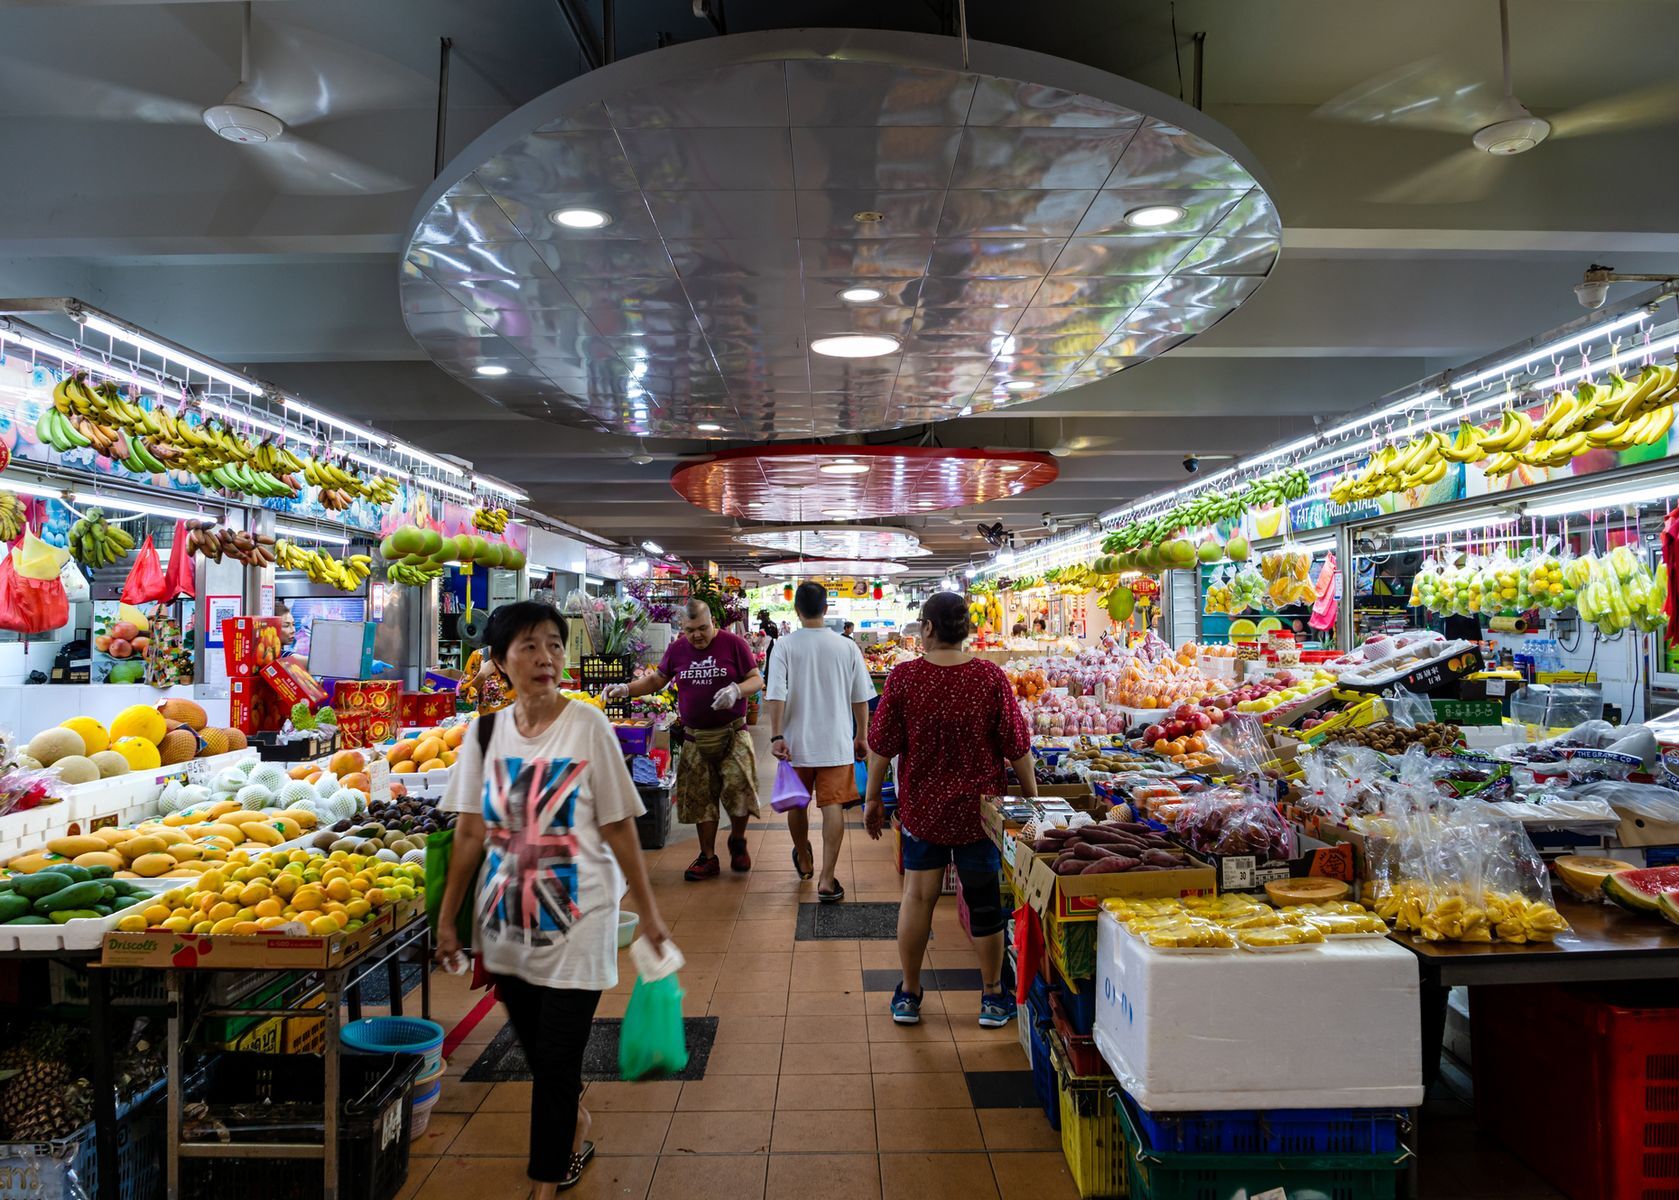 <p>Monthly minimum: $342</p><p>Groceries can be quite expensive in Singapore due to the fact that a large number of items are imported, such as milk, non-tropical fruits, and cheese, but as Joanne Poh of <a href="https://blog.moneysmart.sg/budgeting/cost-living-singapore/" title="https://blog.moneysmart.sg/budgeting/cost-living-singapore/">Money Smart</a> says, “If you cook at home every day,” you can probably manage to spend as little as $200 a month on groceries.</p>